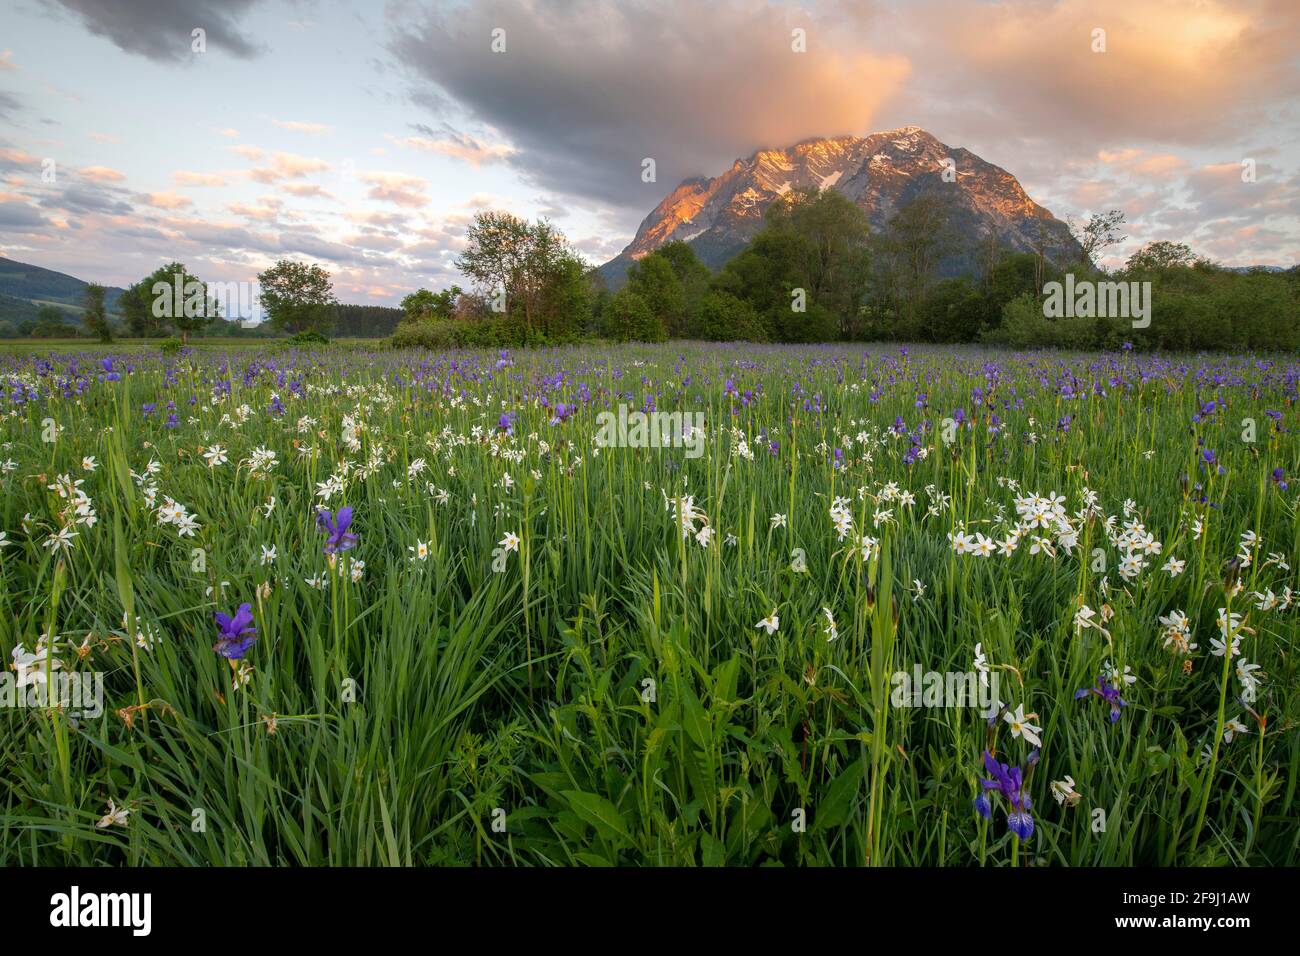 Meadow with white mountain daffodils (Narcissus radiiflorus) and Siberian iris (Iris sibirica), at sunrise, with Mount Grimming behind. Styria, Austria... Stock Photo